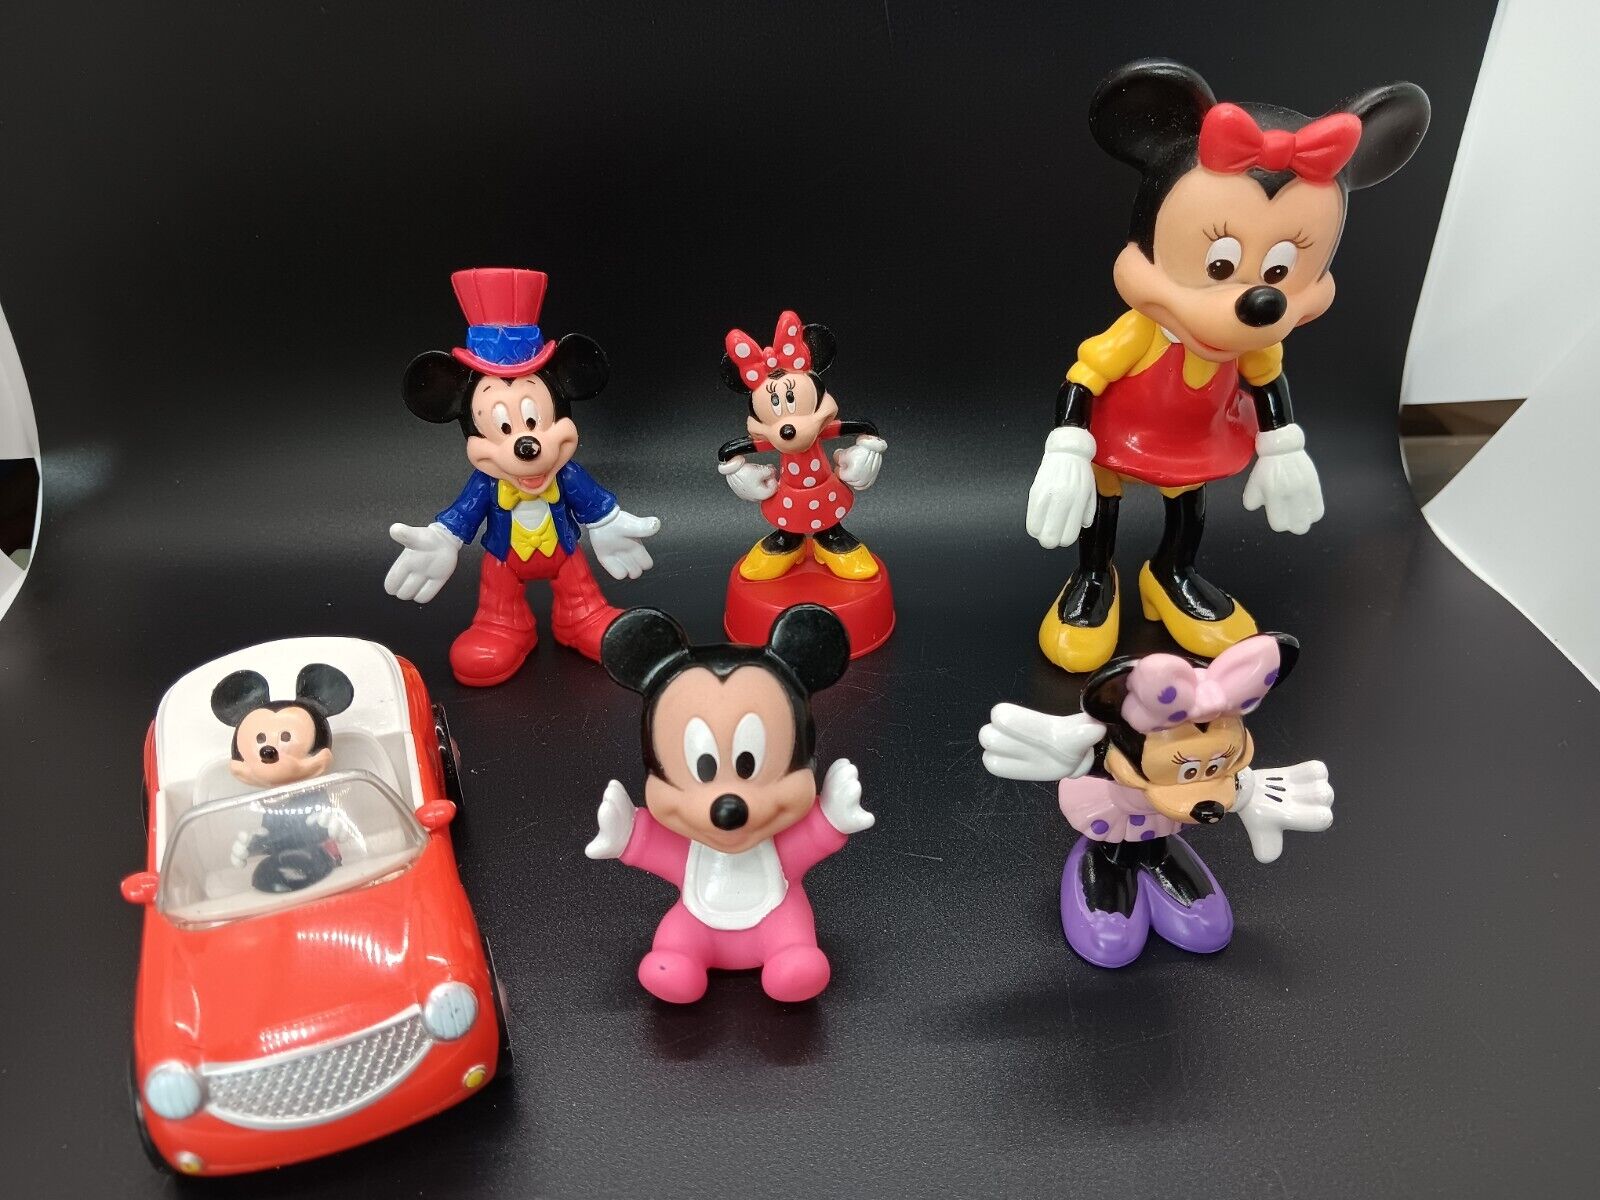 Lot of 6 Vintage Minny/Mickey Mouse Figurines and a Car